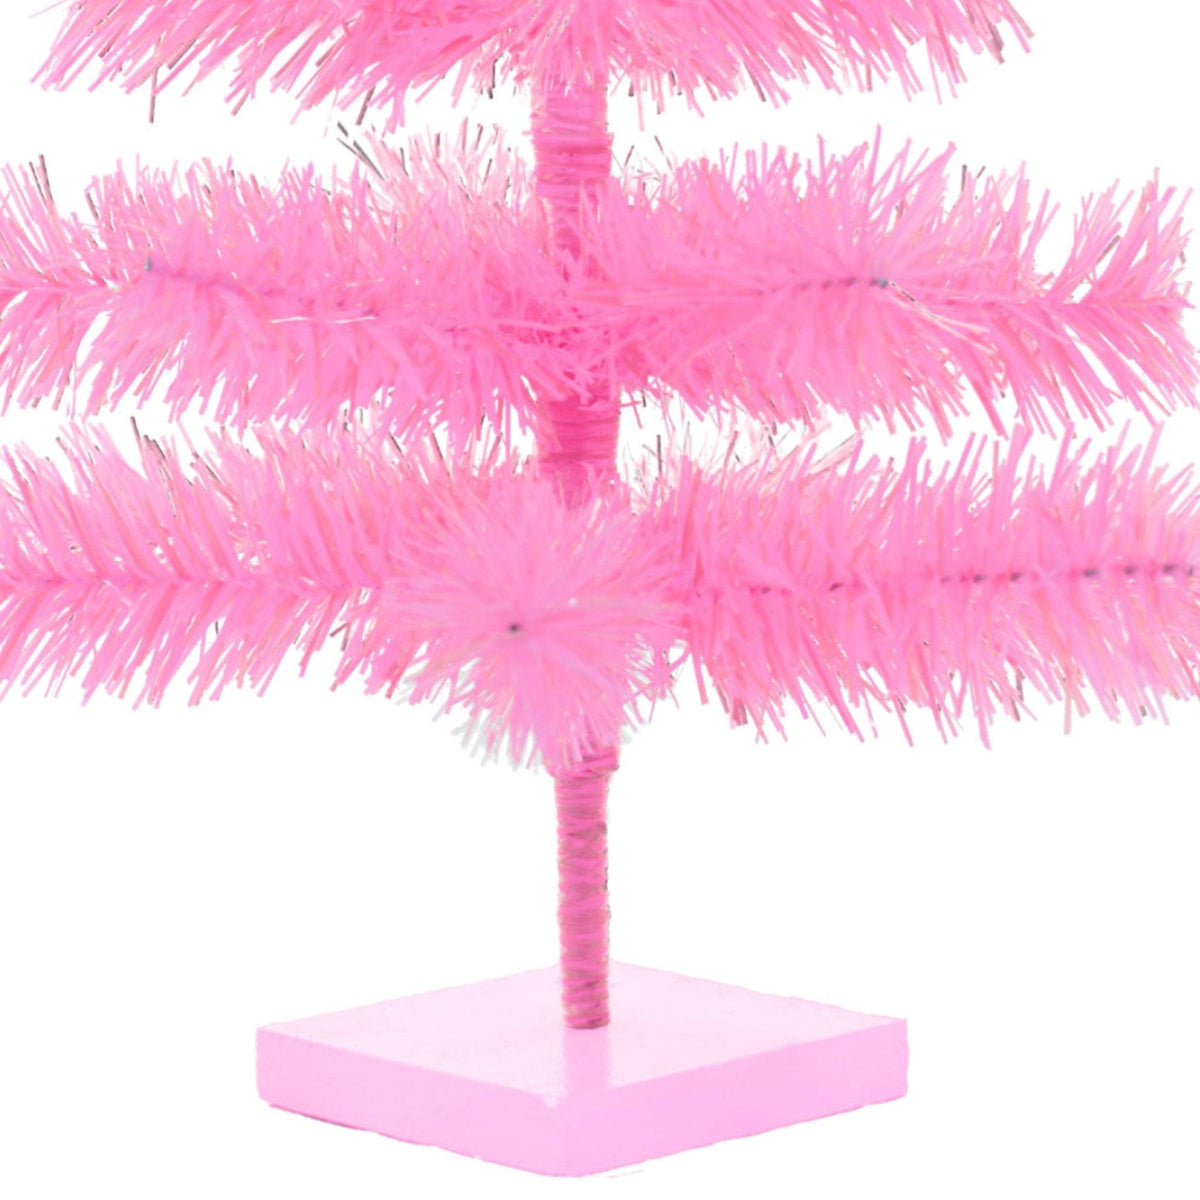 18 inch trees come with a wooden single tiered base painted pink to match the color of your tree.